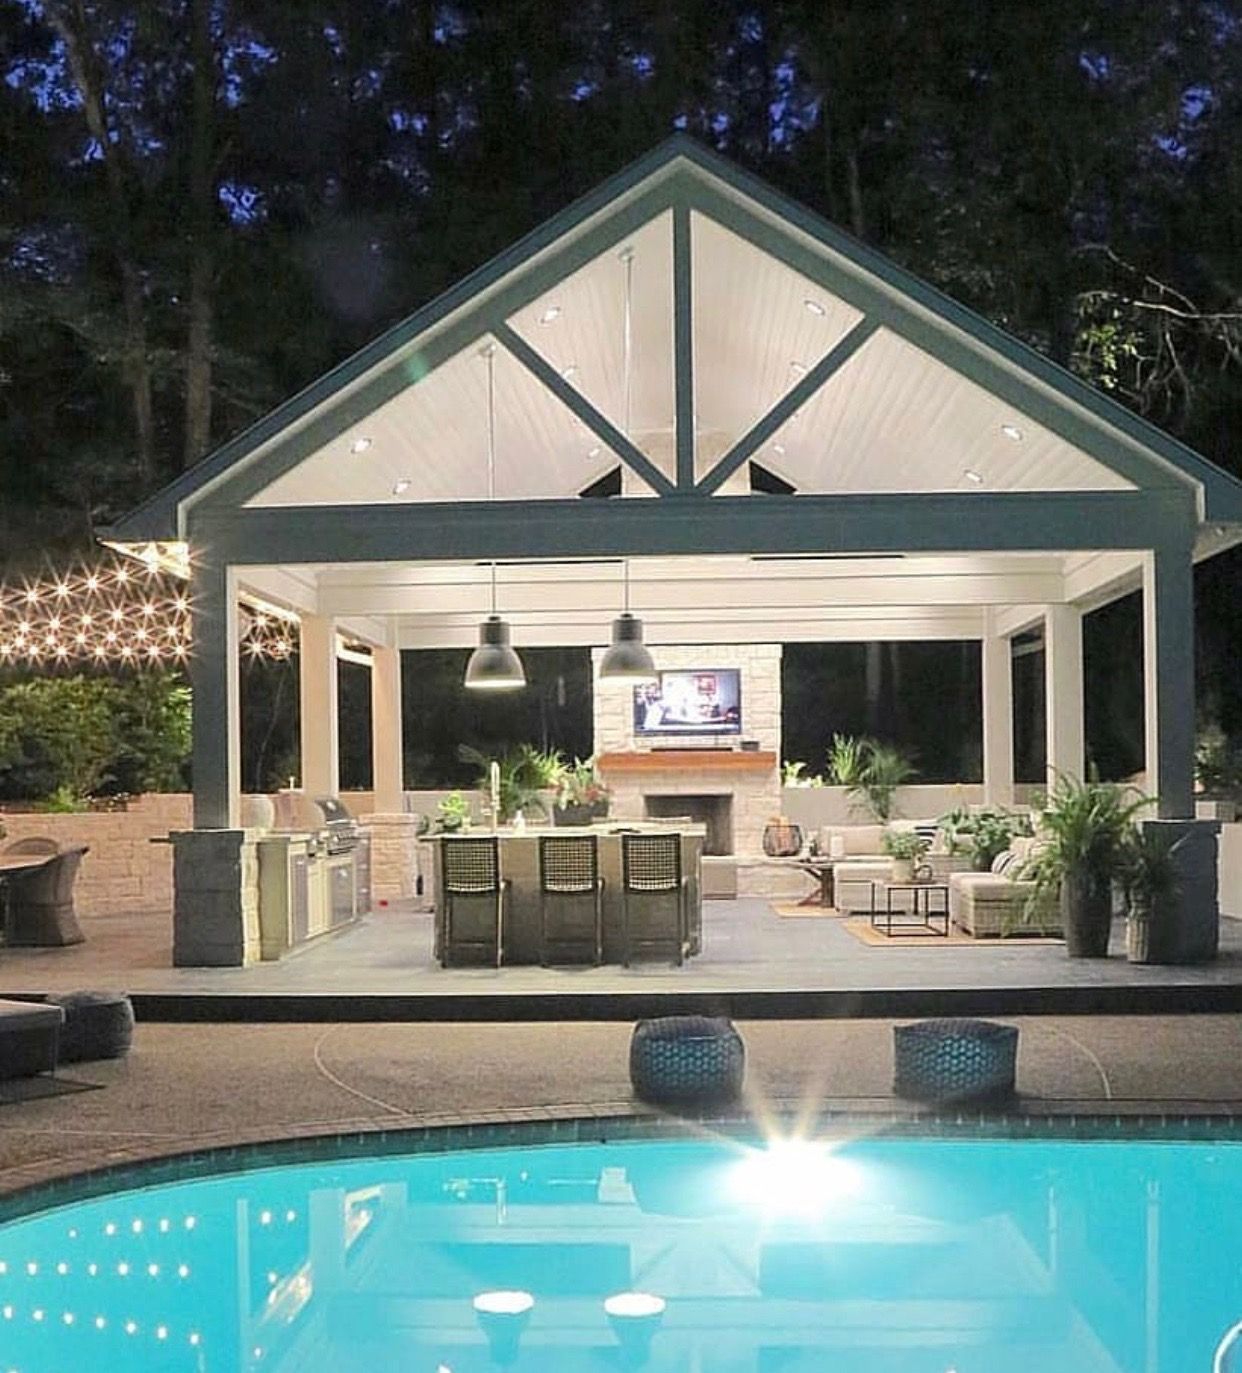 Most Popular Pool House Ideas for
Relaxing Retreat